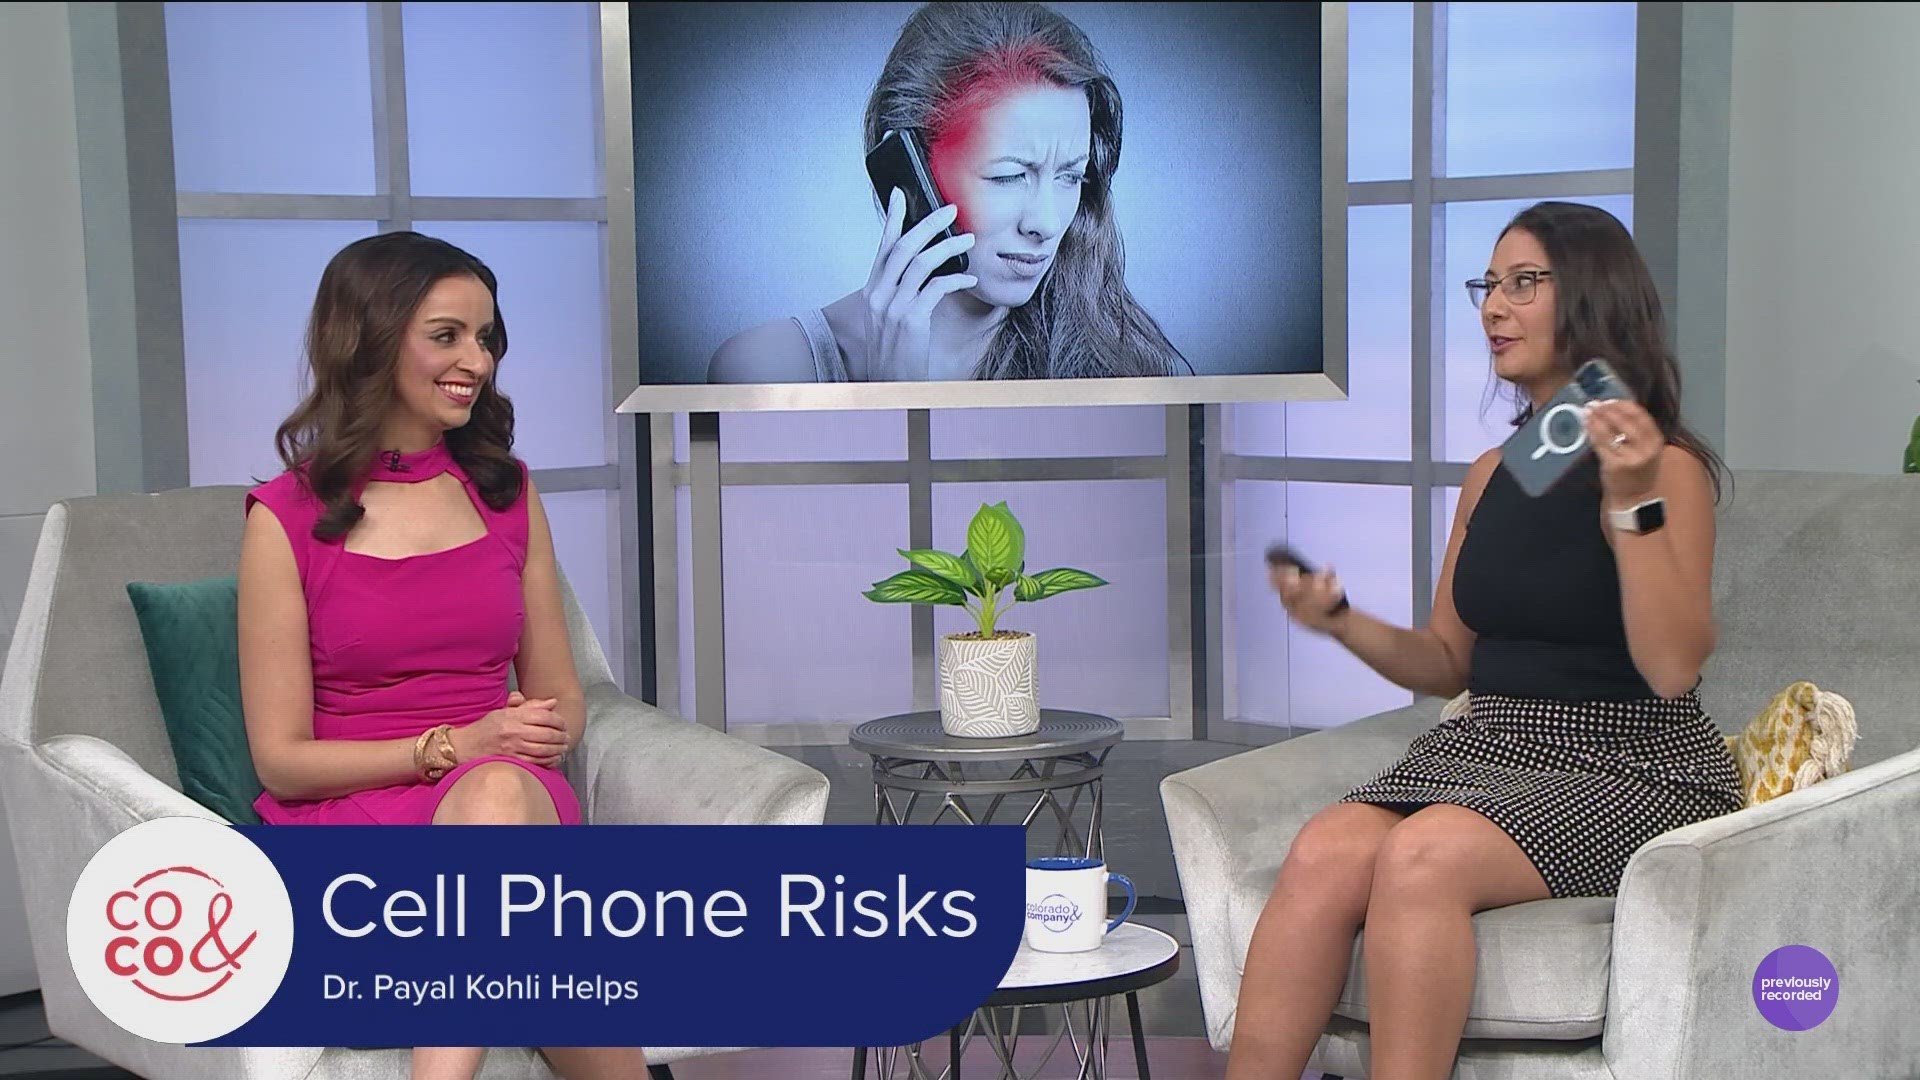 A new study is out that says we may need to be a bit more careful about the long-term health risks that cell phones may cause. Dr. Kohli gives us the details.